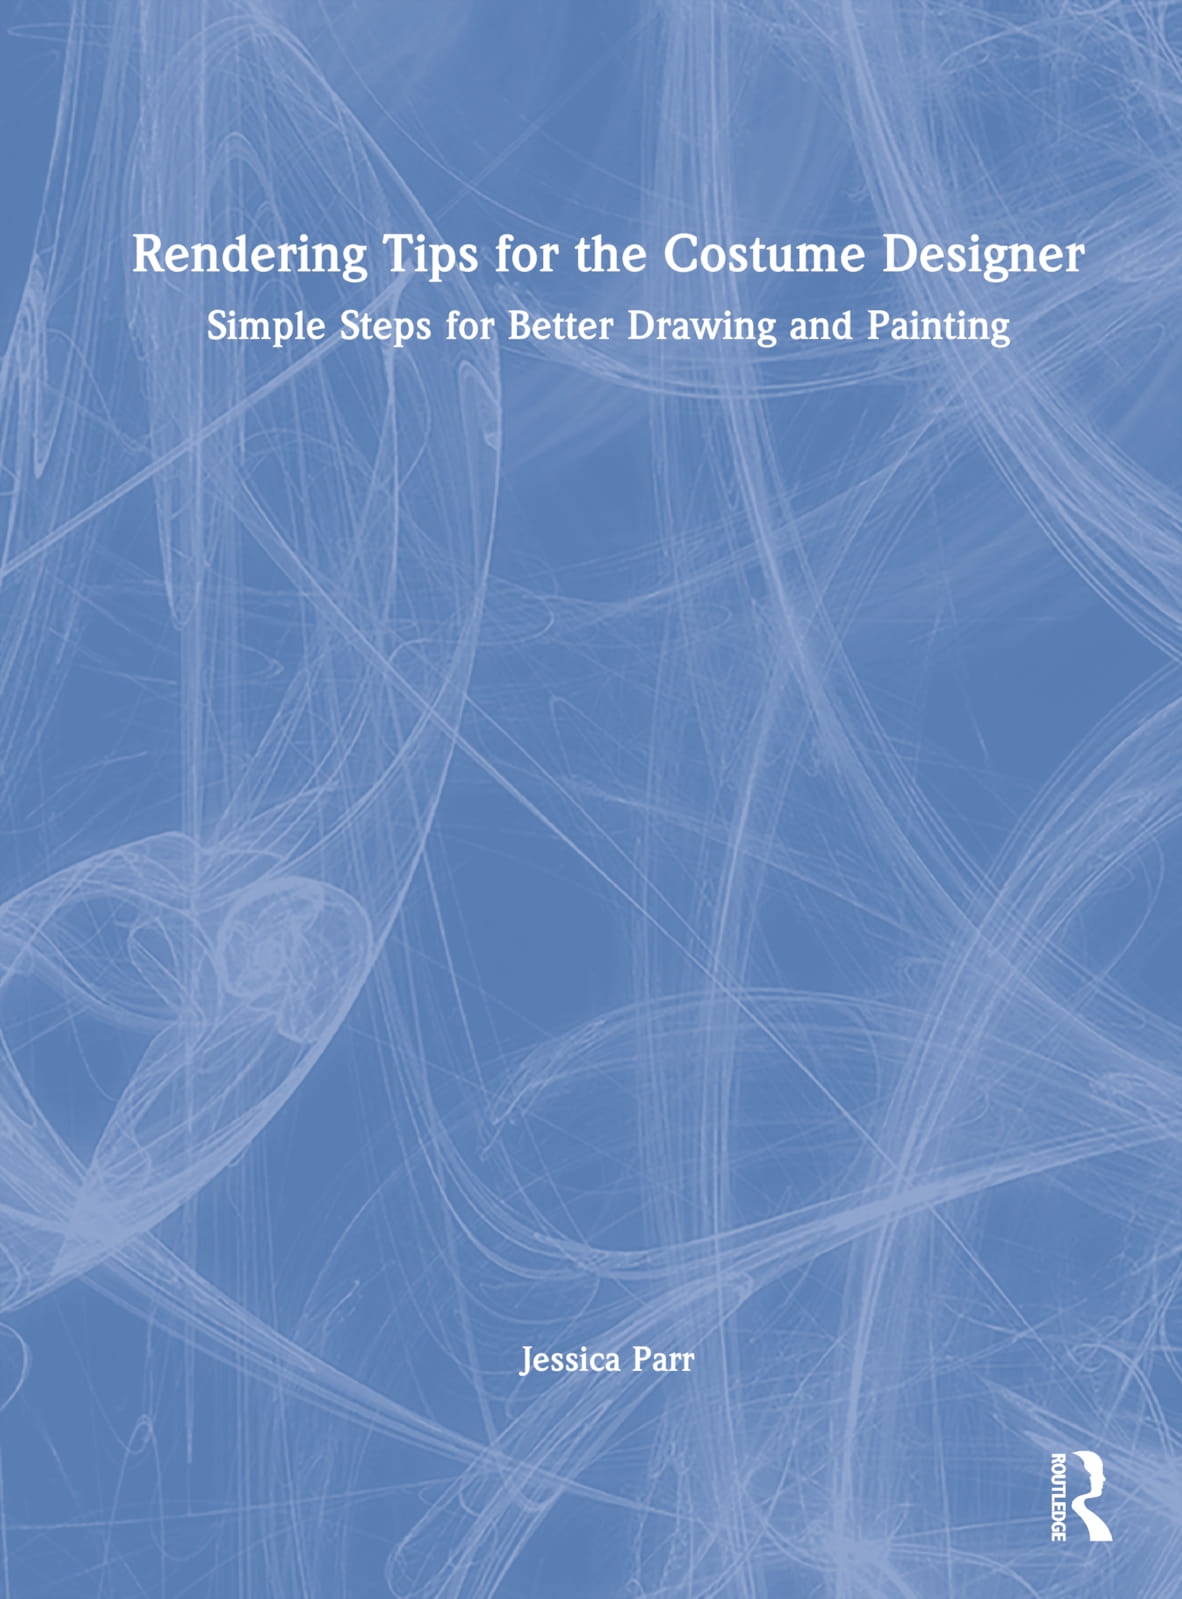 Rendering Tips for the Costume Designer: Simple Steps for Better Drawing and Painting